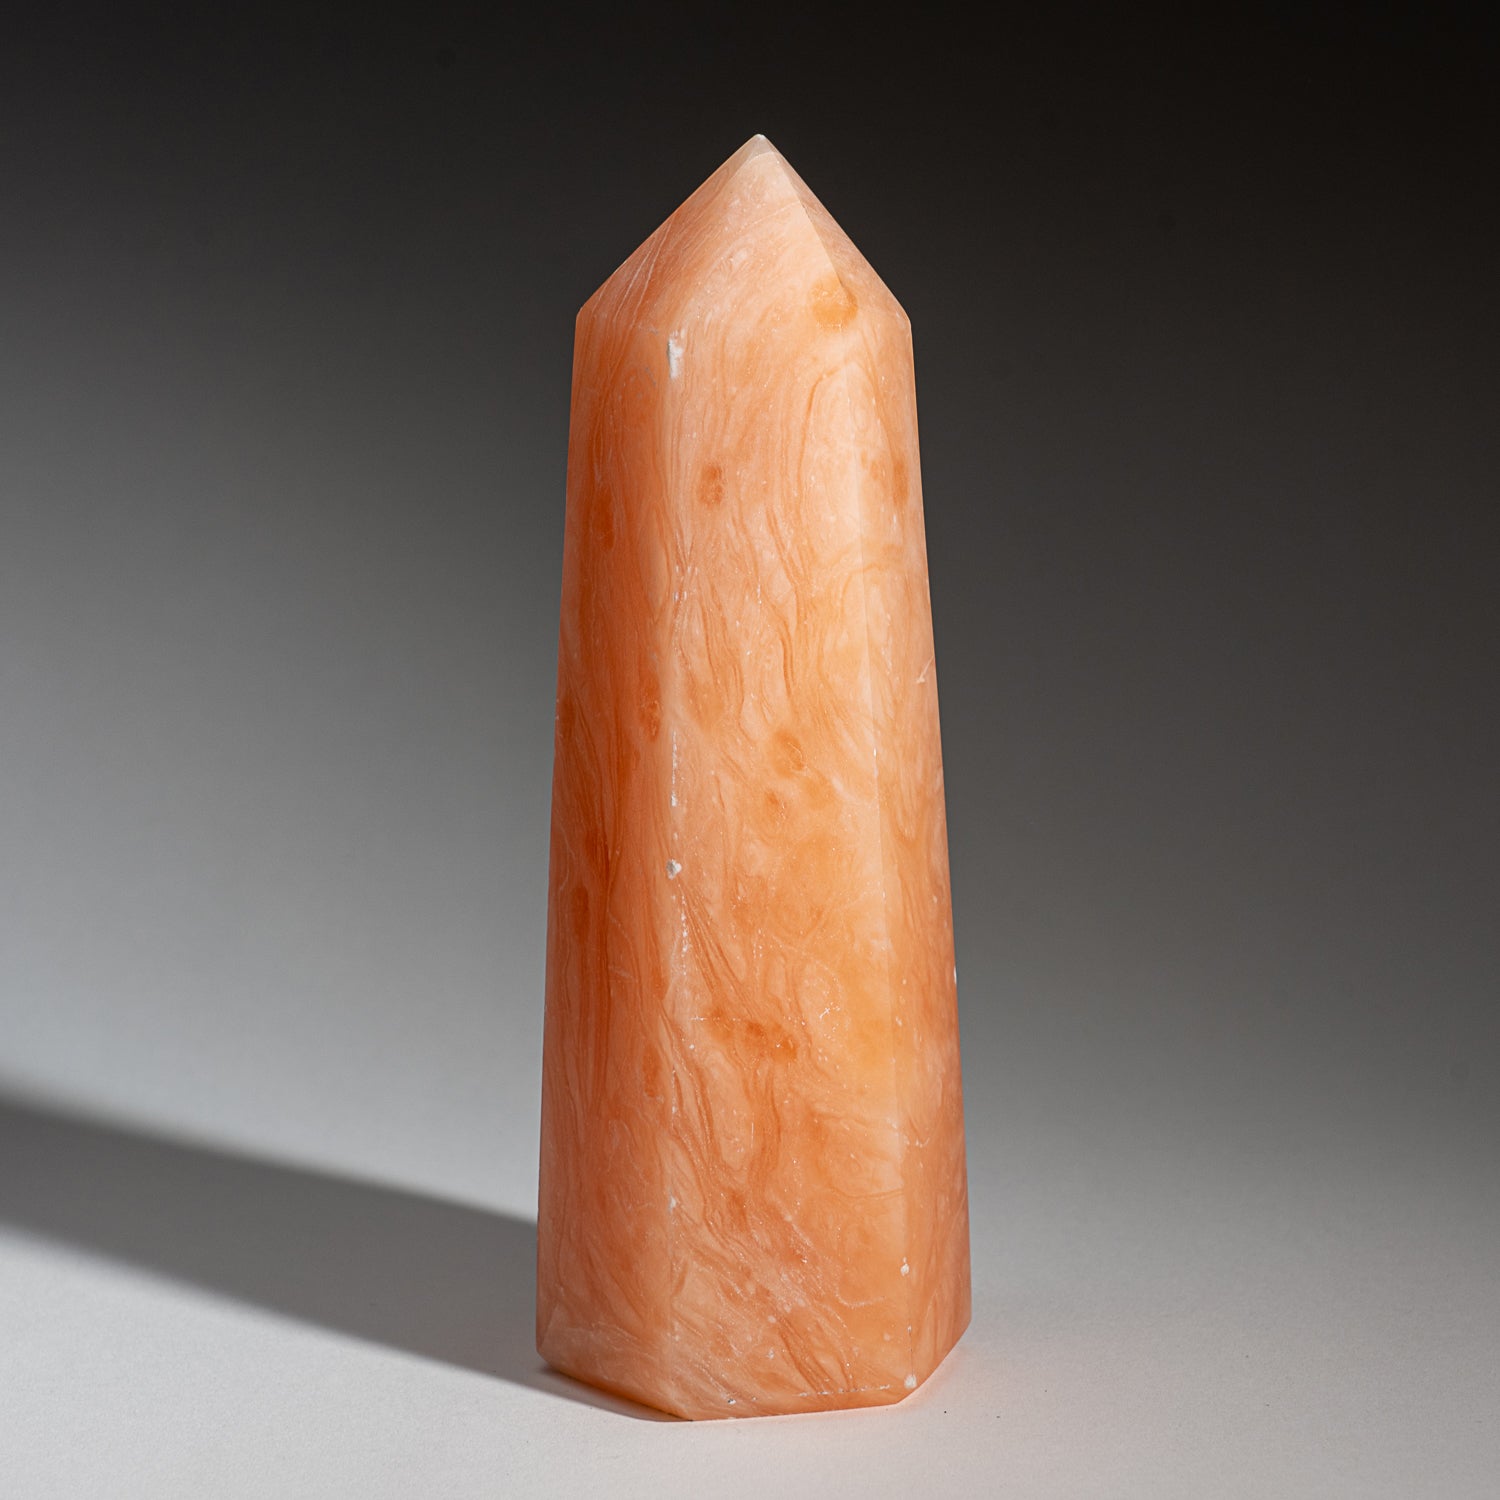 Genuine Polished Orange Selenite Point from Morocco (2.4 lbs)